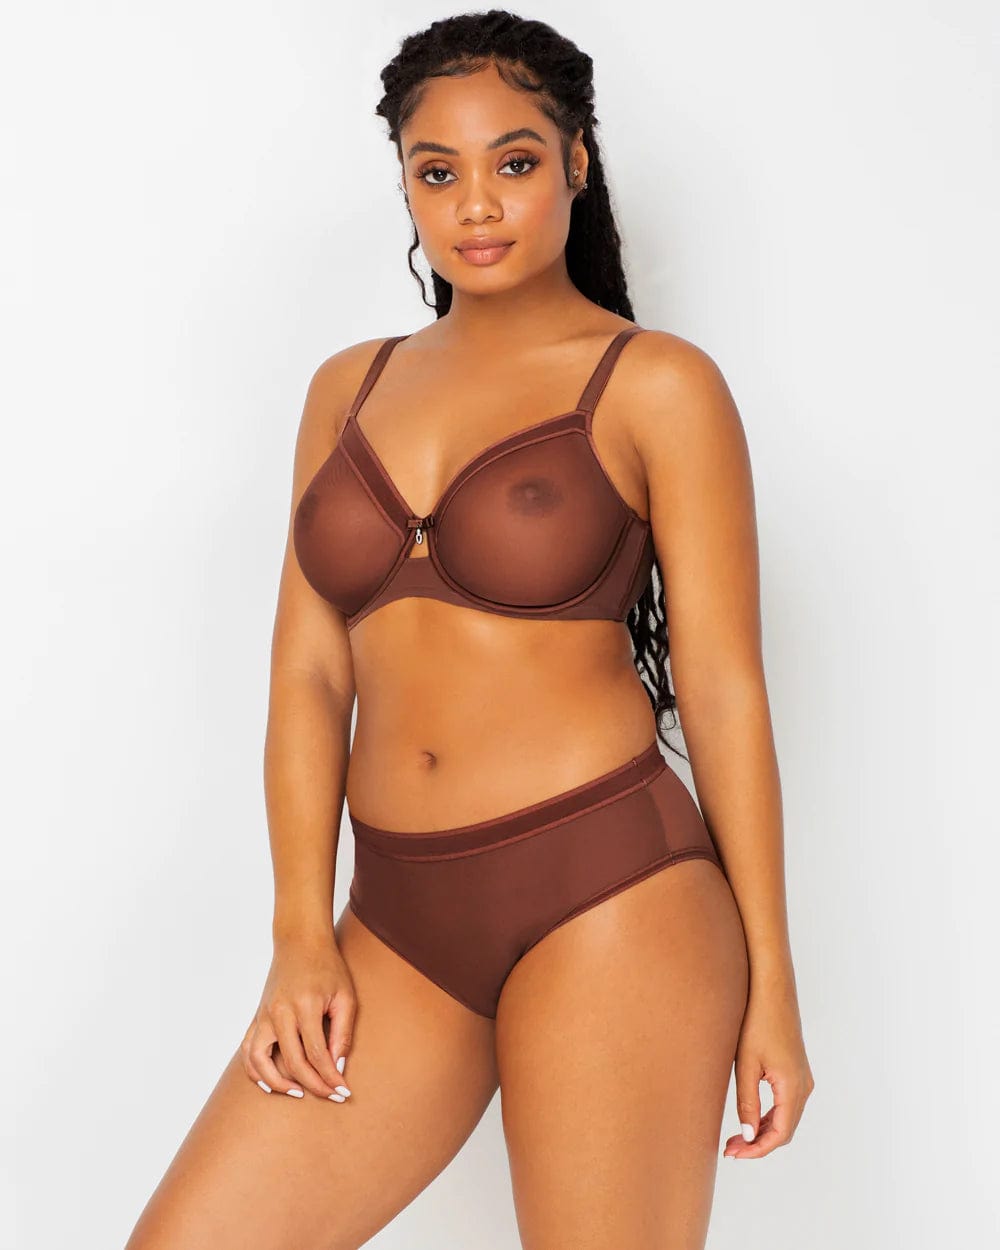 Unlined Sexy Mesh See Through Bra Lingerie Set Plus Size